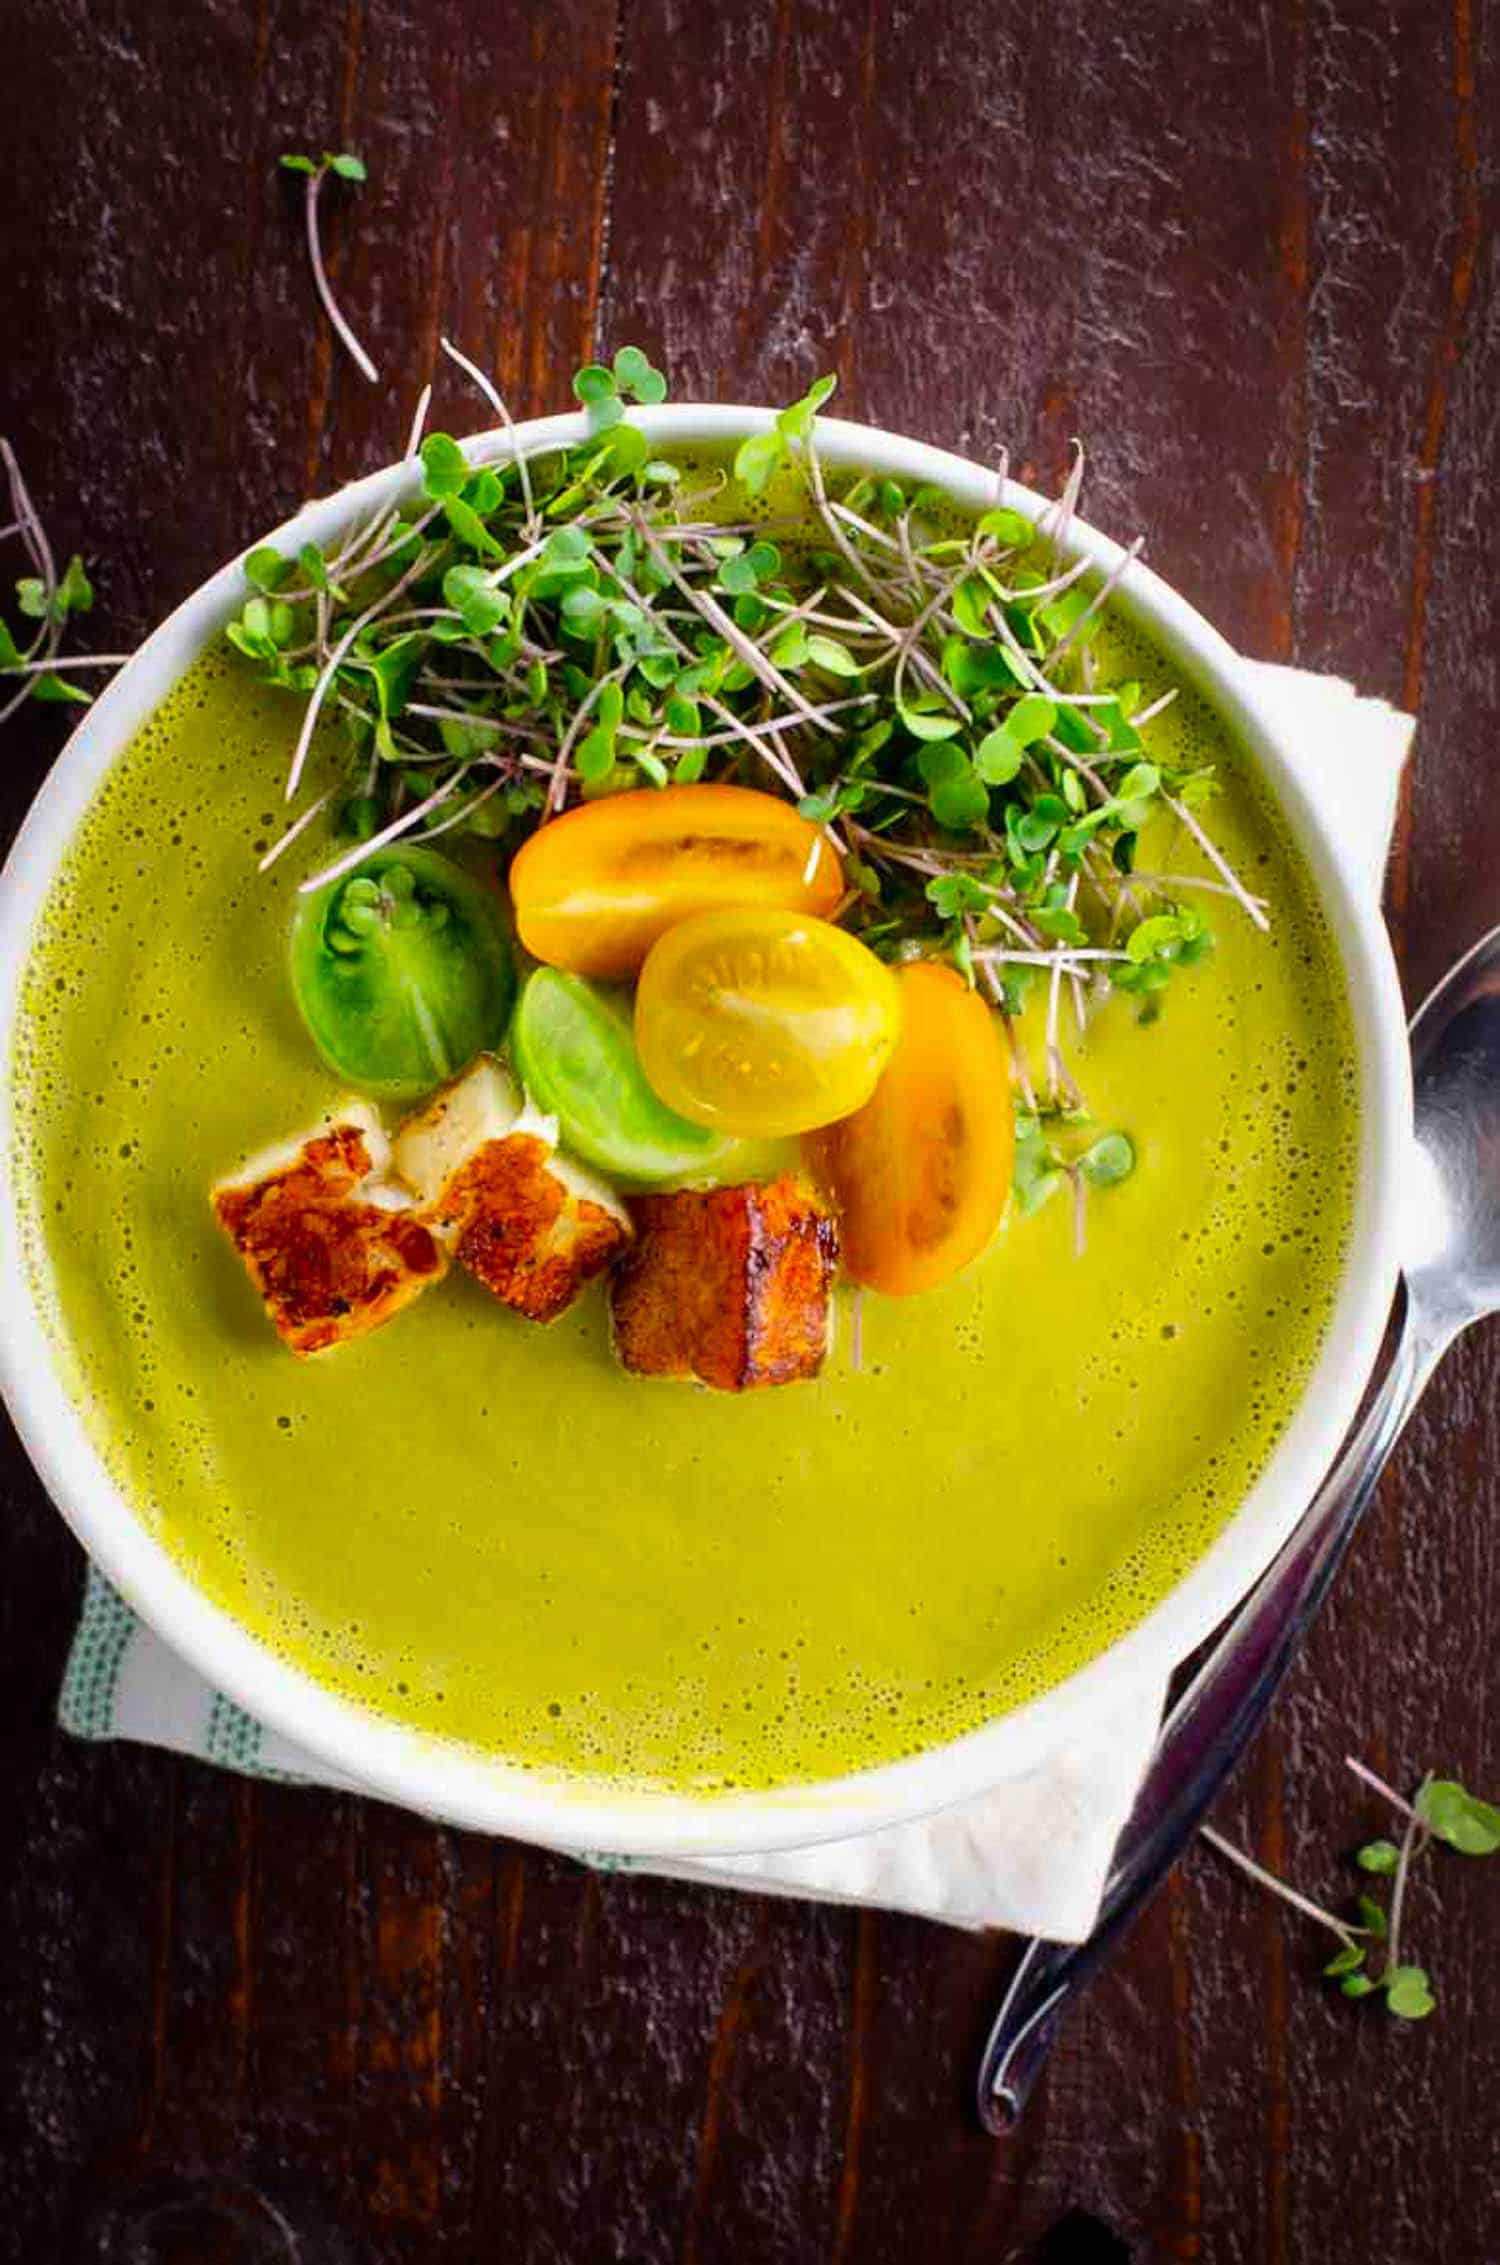 Popular ramps recipes asparagus ramp soup garnished with tomato and pea shoots on a wooden background